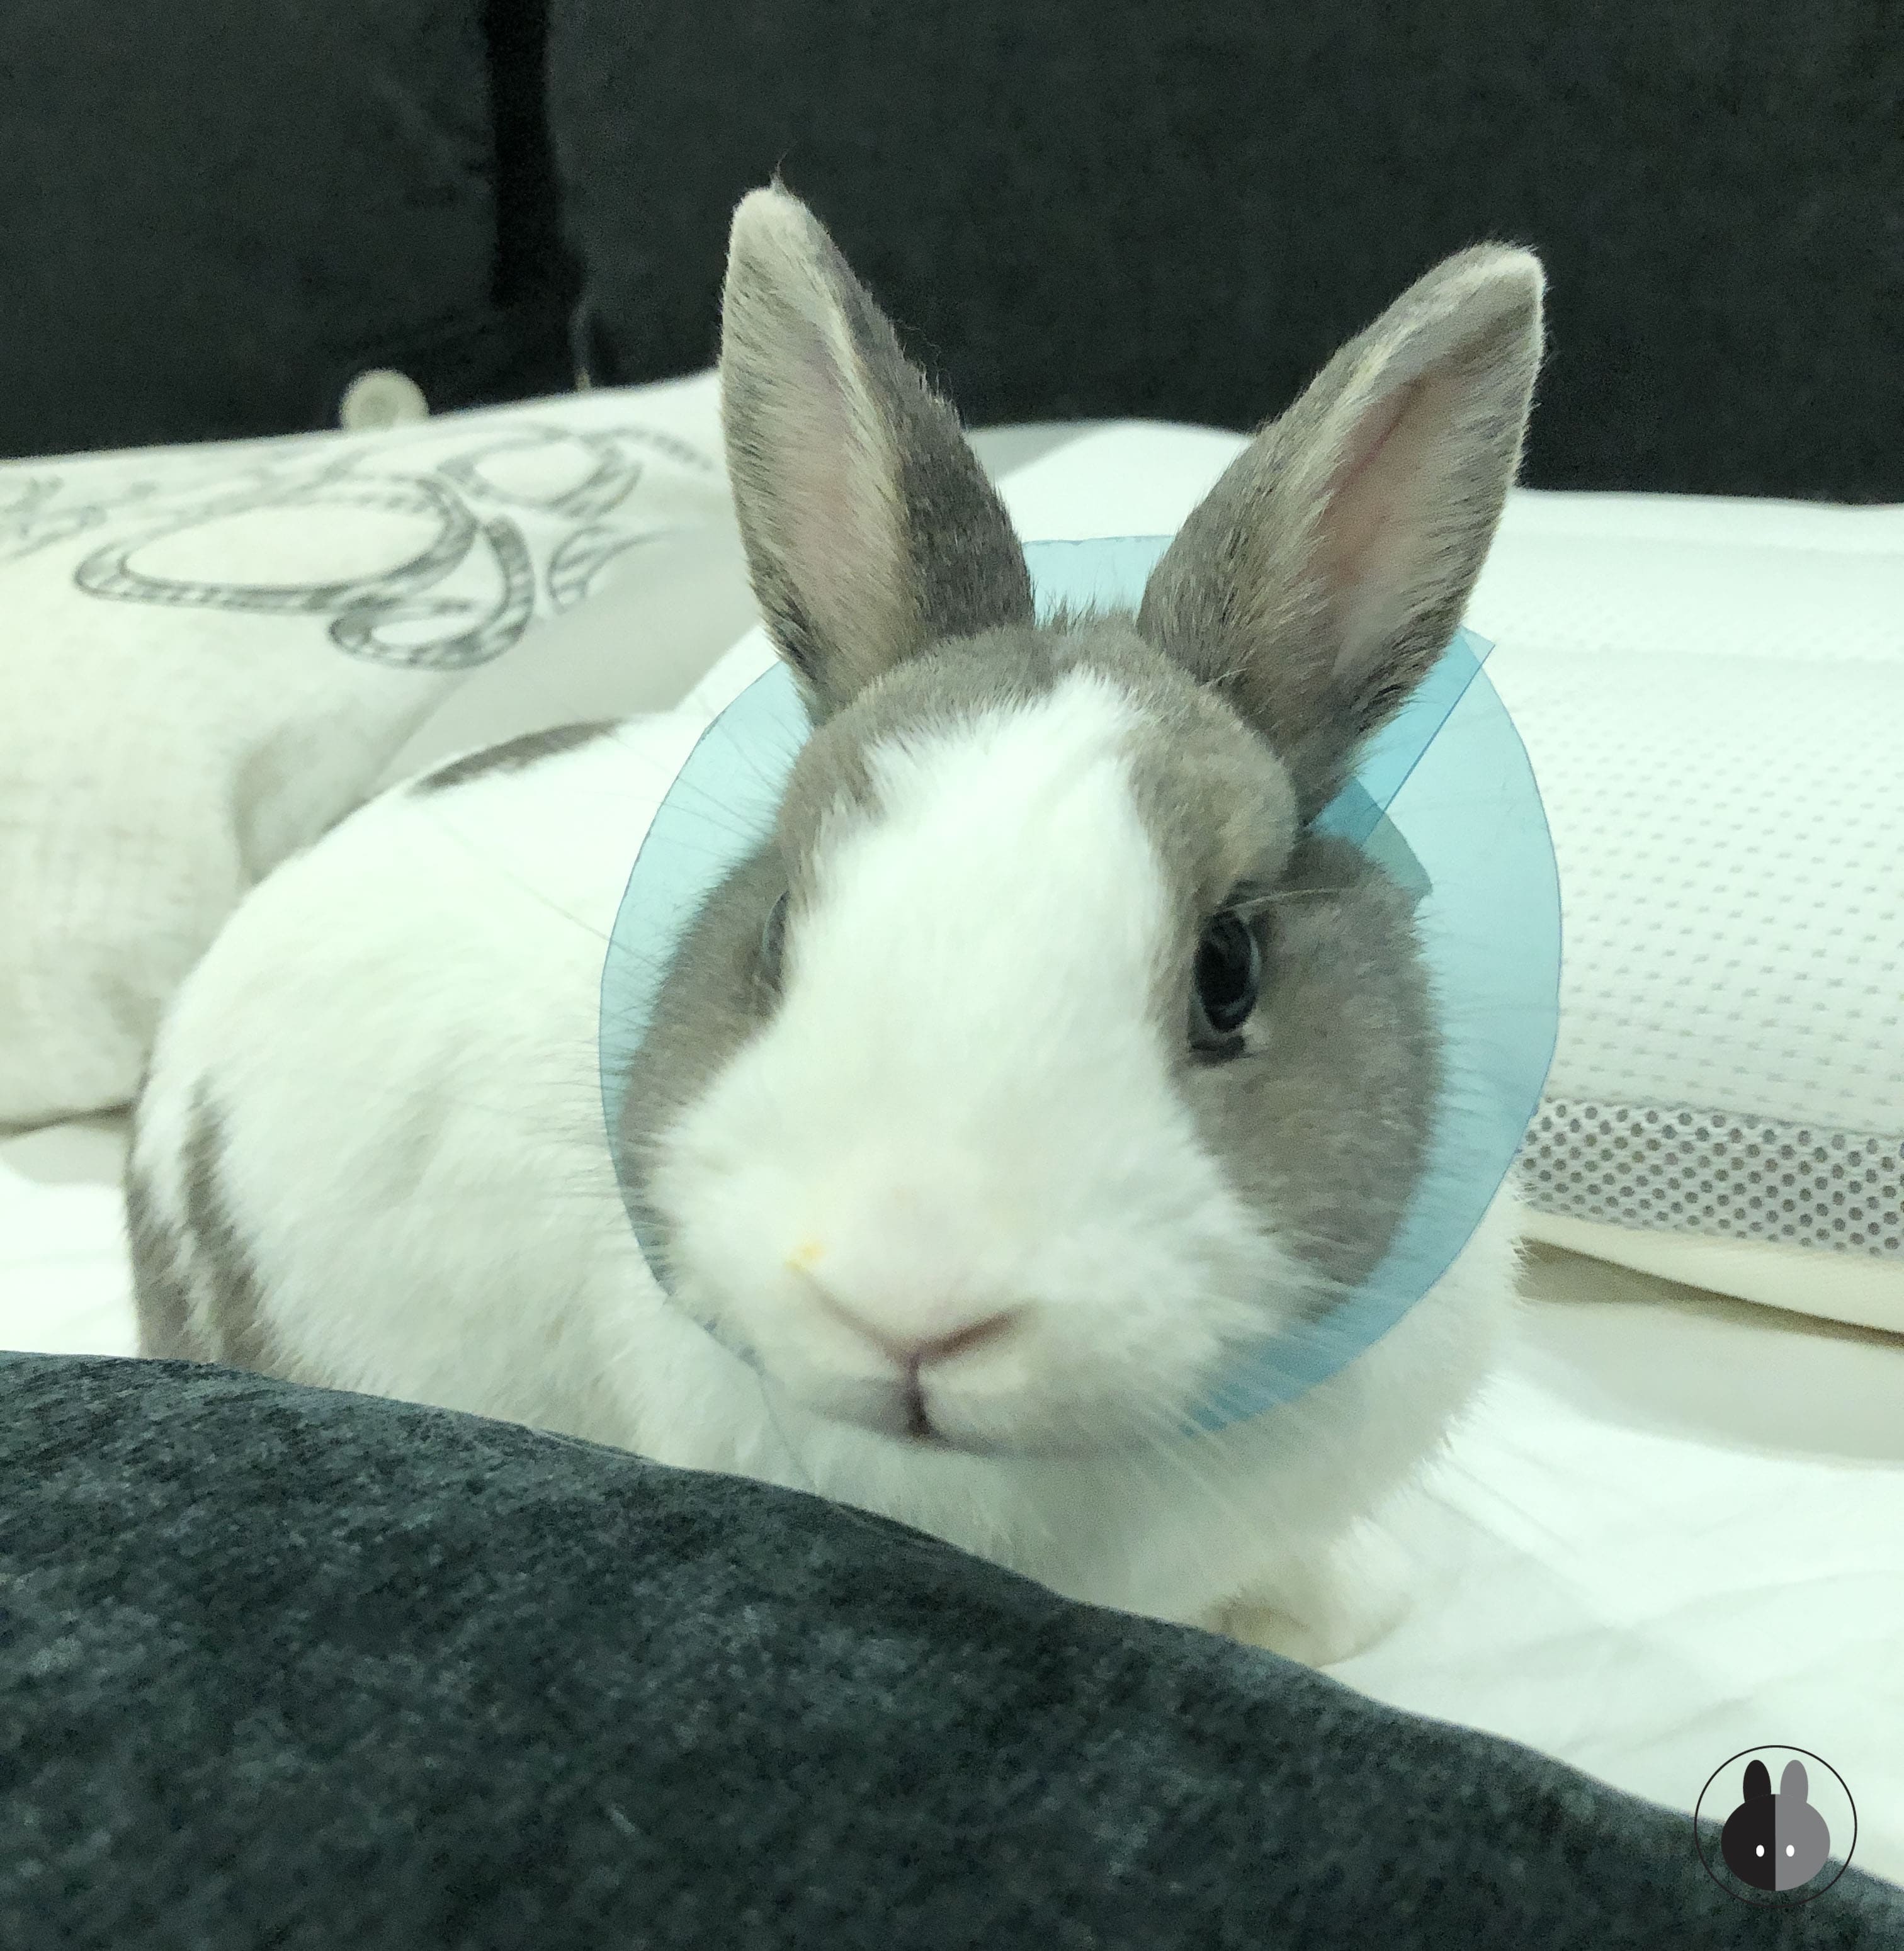 My rabbit wearing a plastic cone to prevent her from licking her stitches